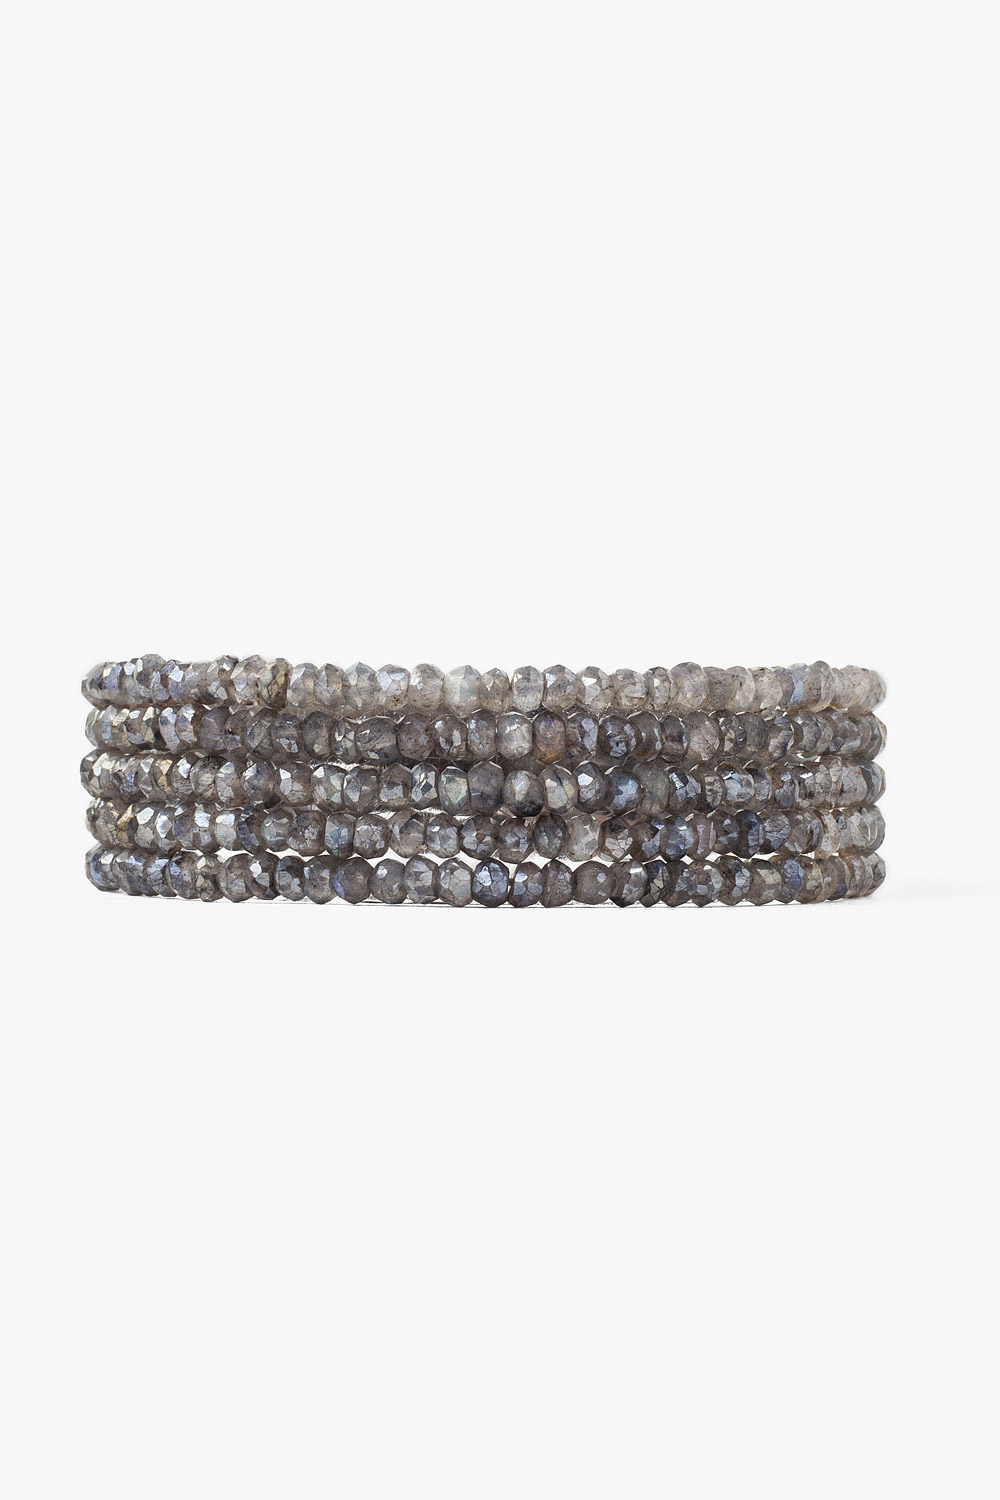 MYSTIC LABRADORITE 5 LAYER NAKED WRAP - Kingfisher Road - Online Boutique